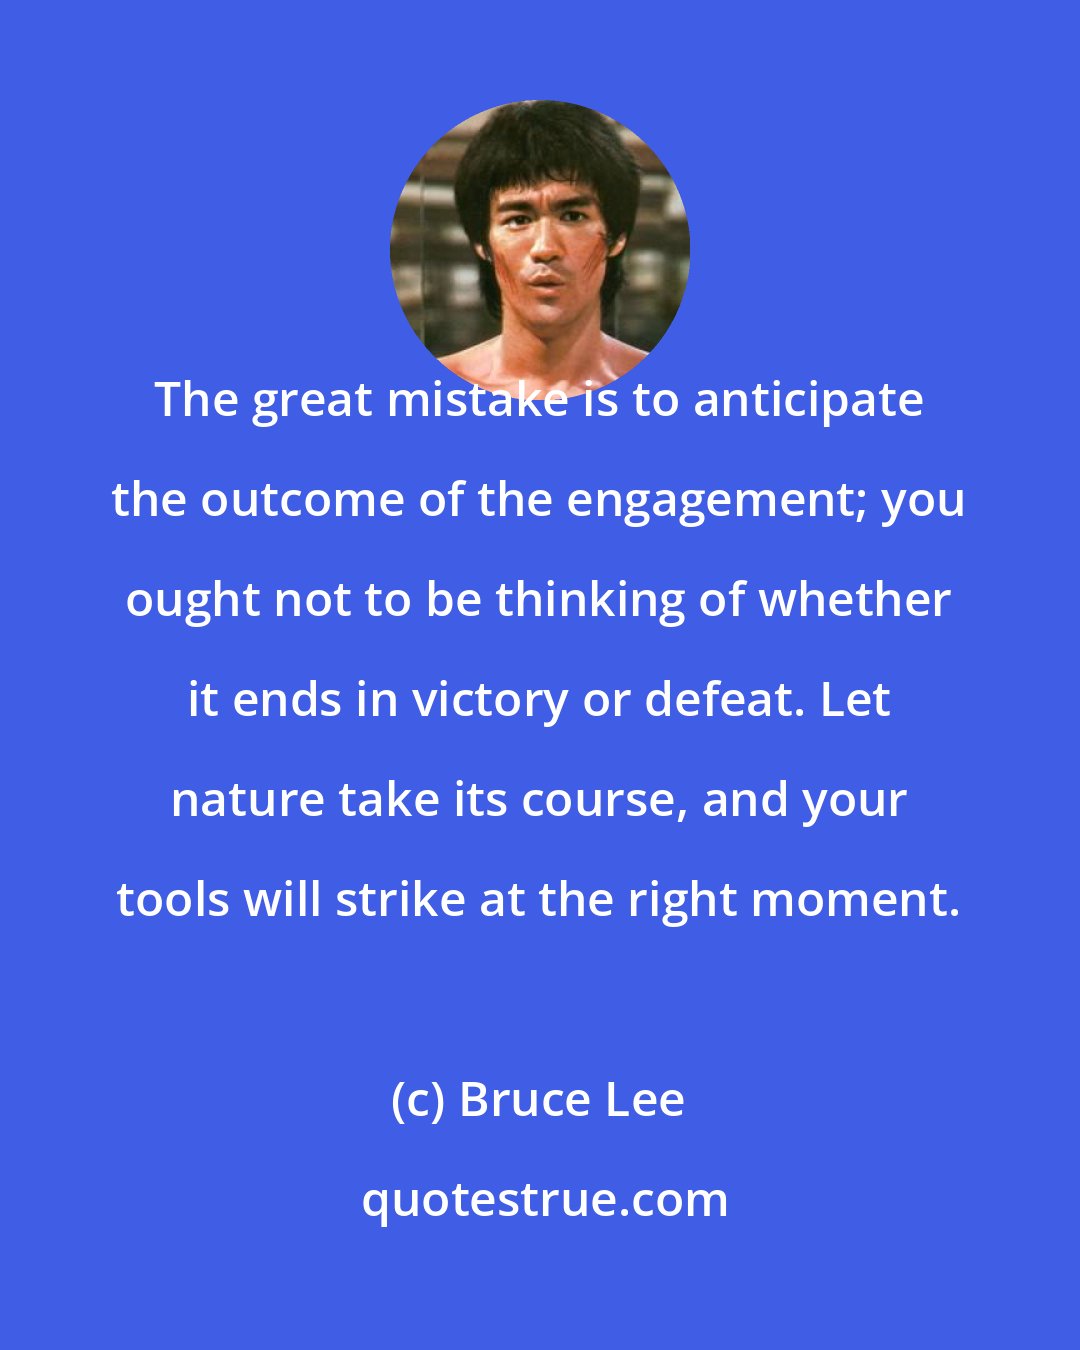 Bruce Lee: The great mistake is to anticipate the outcome of the engagement; you ought not to be thinking of whether it ends in victory or defeat. Let nature take its course, and your tools will strike at the right moment.